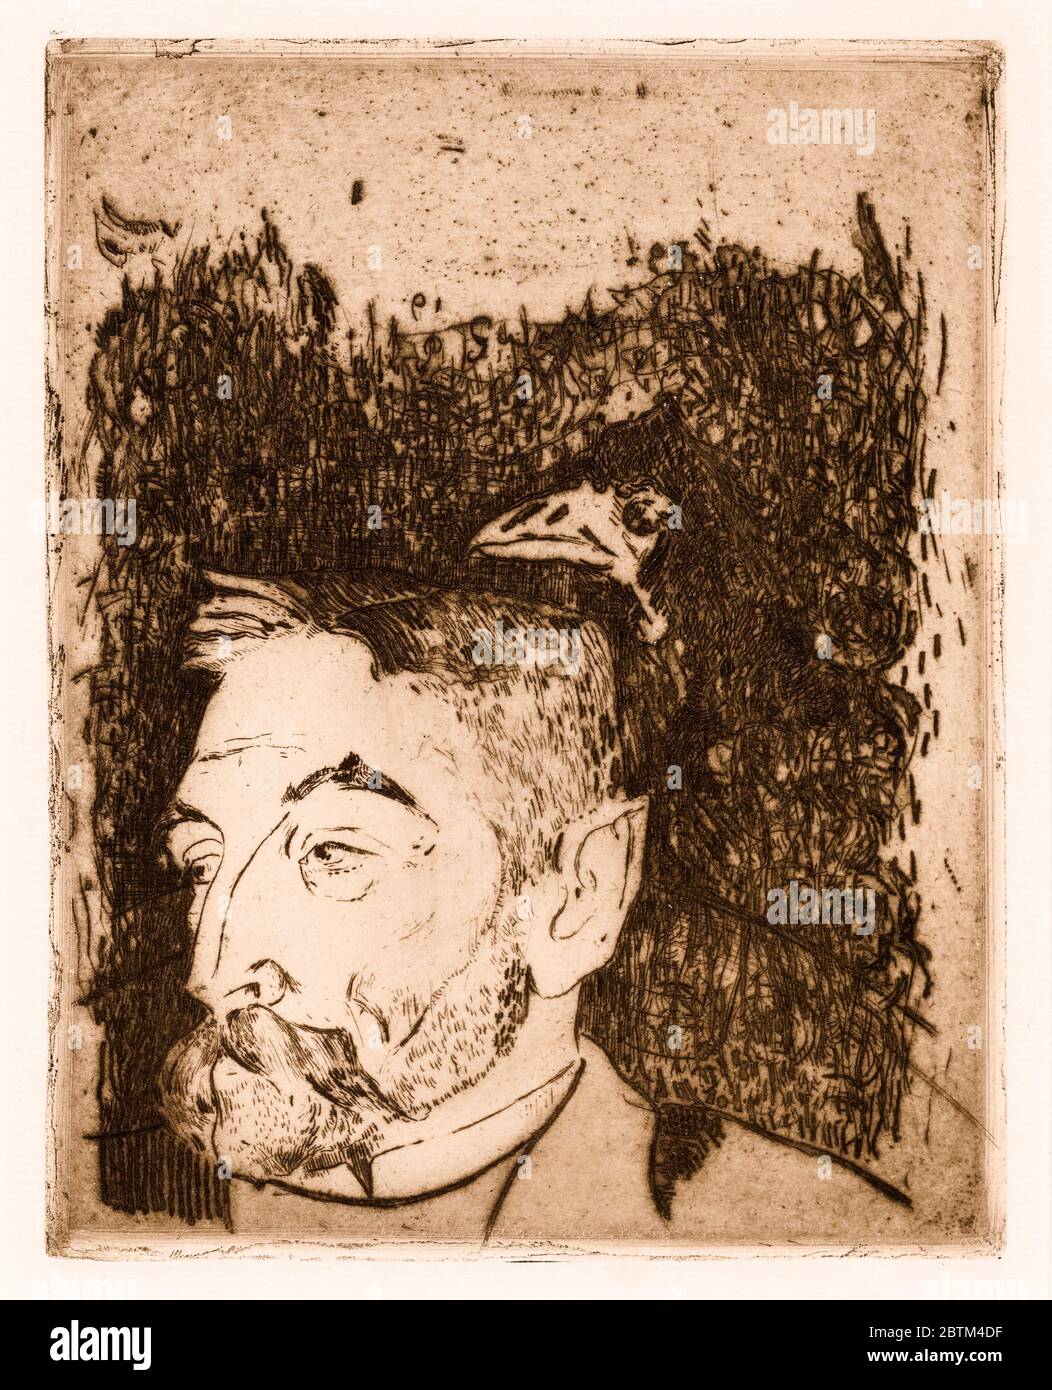 Stéphane Mallarmé (1842-1898), French Poet, drypoint portrait engraving by Paul Gauguin, 1891 Stock Photo